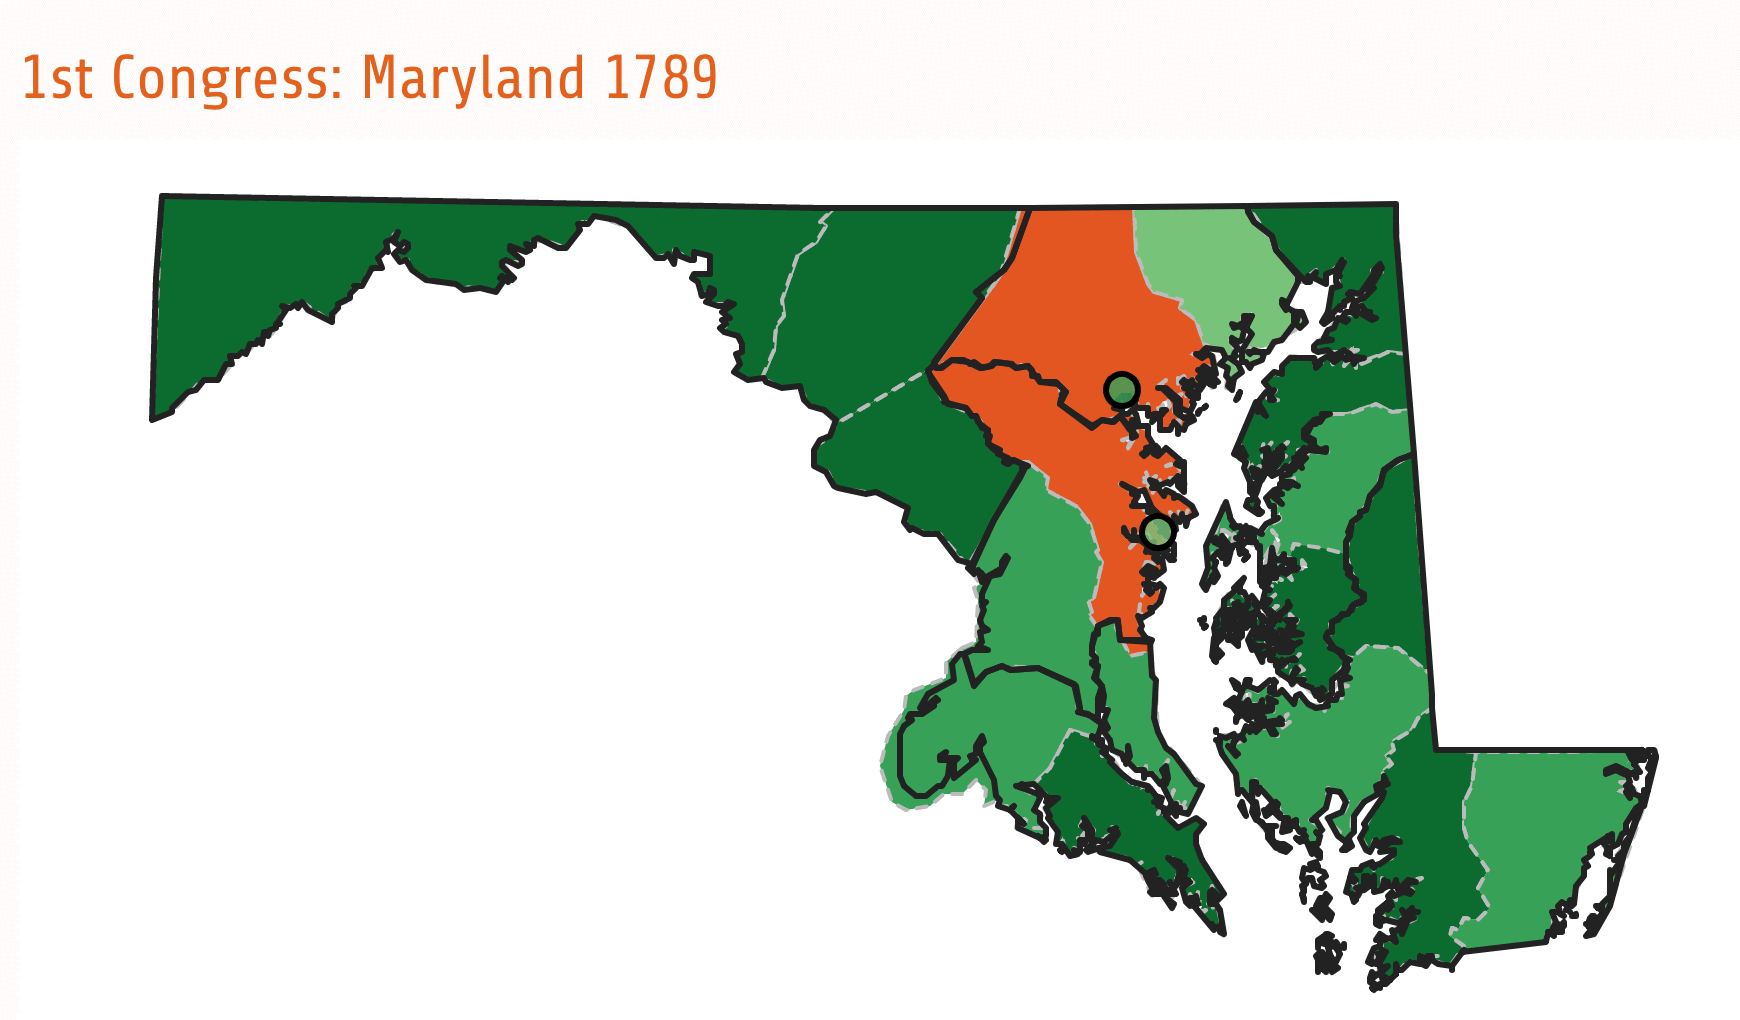 How party voting patterns changed in Maryland over nineteen Congresses. Note how competition between Federalists (green) and Anti-Federalists (orange), which is briefly interrupted by state-wide parties (blue and red), is replaced by competition between Federalists (green) and Democratic-Republicans (purple). Those two parties remain dominant until the Democratic-Republicans fragment into factions in the 19th Congress.